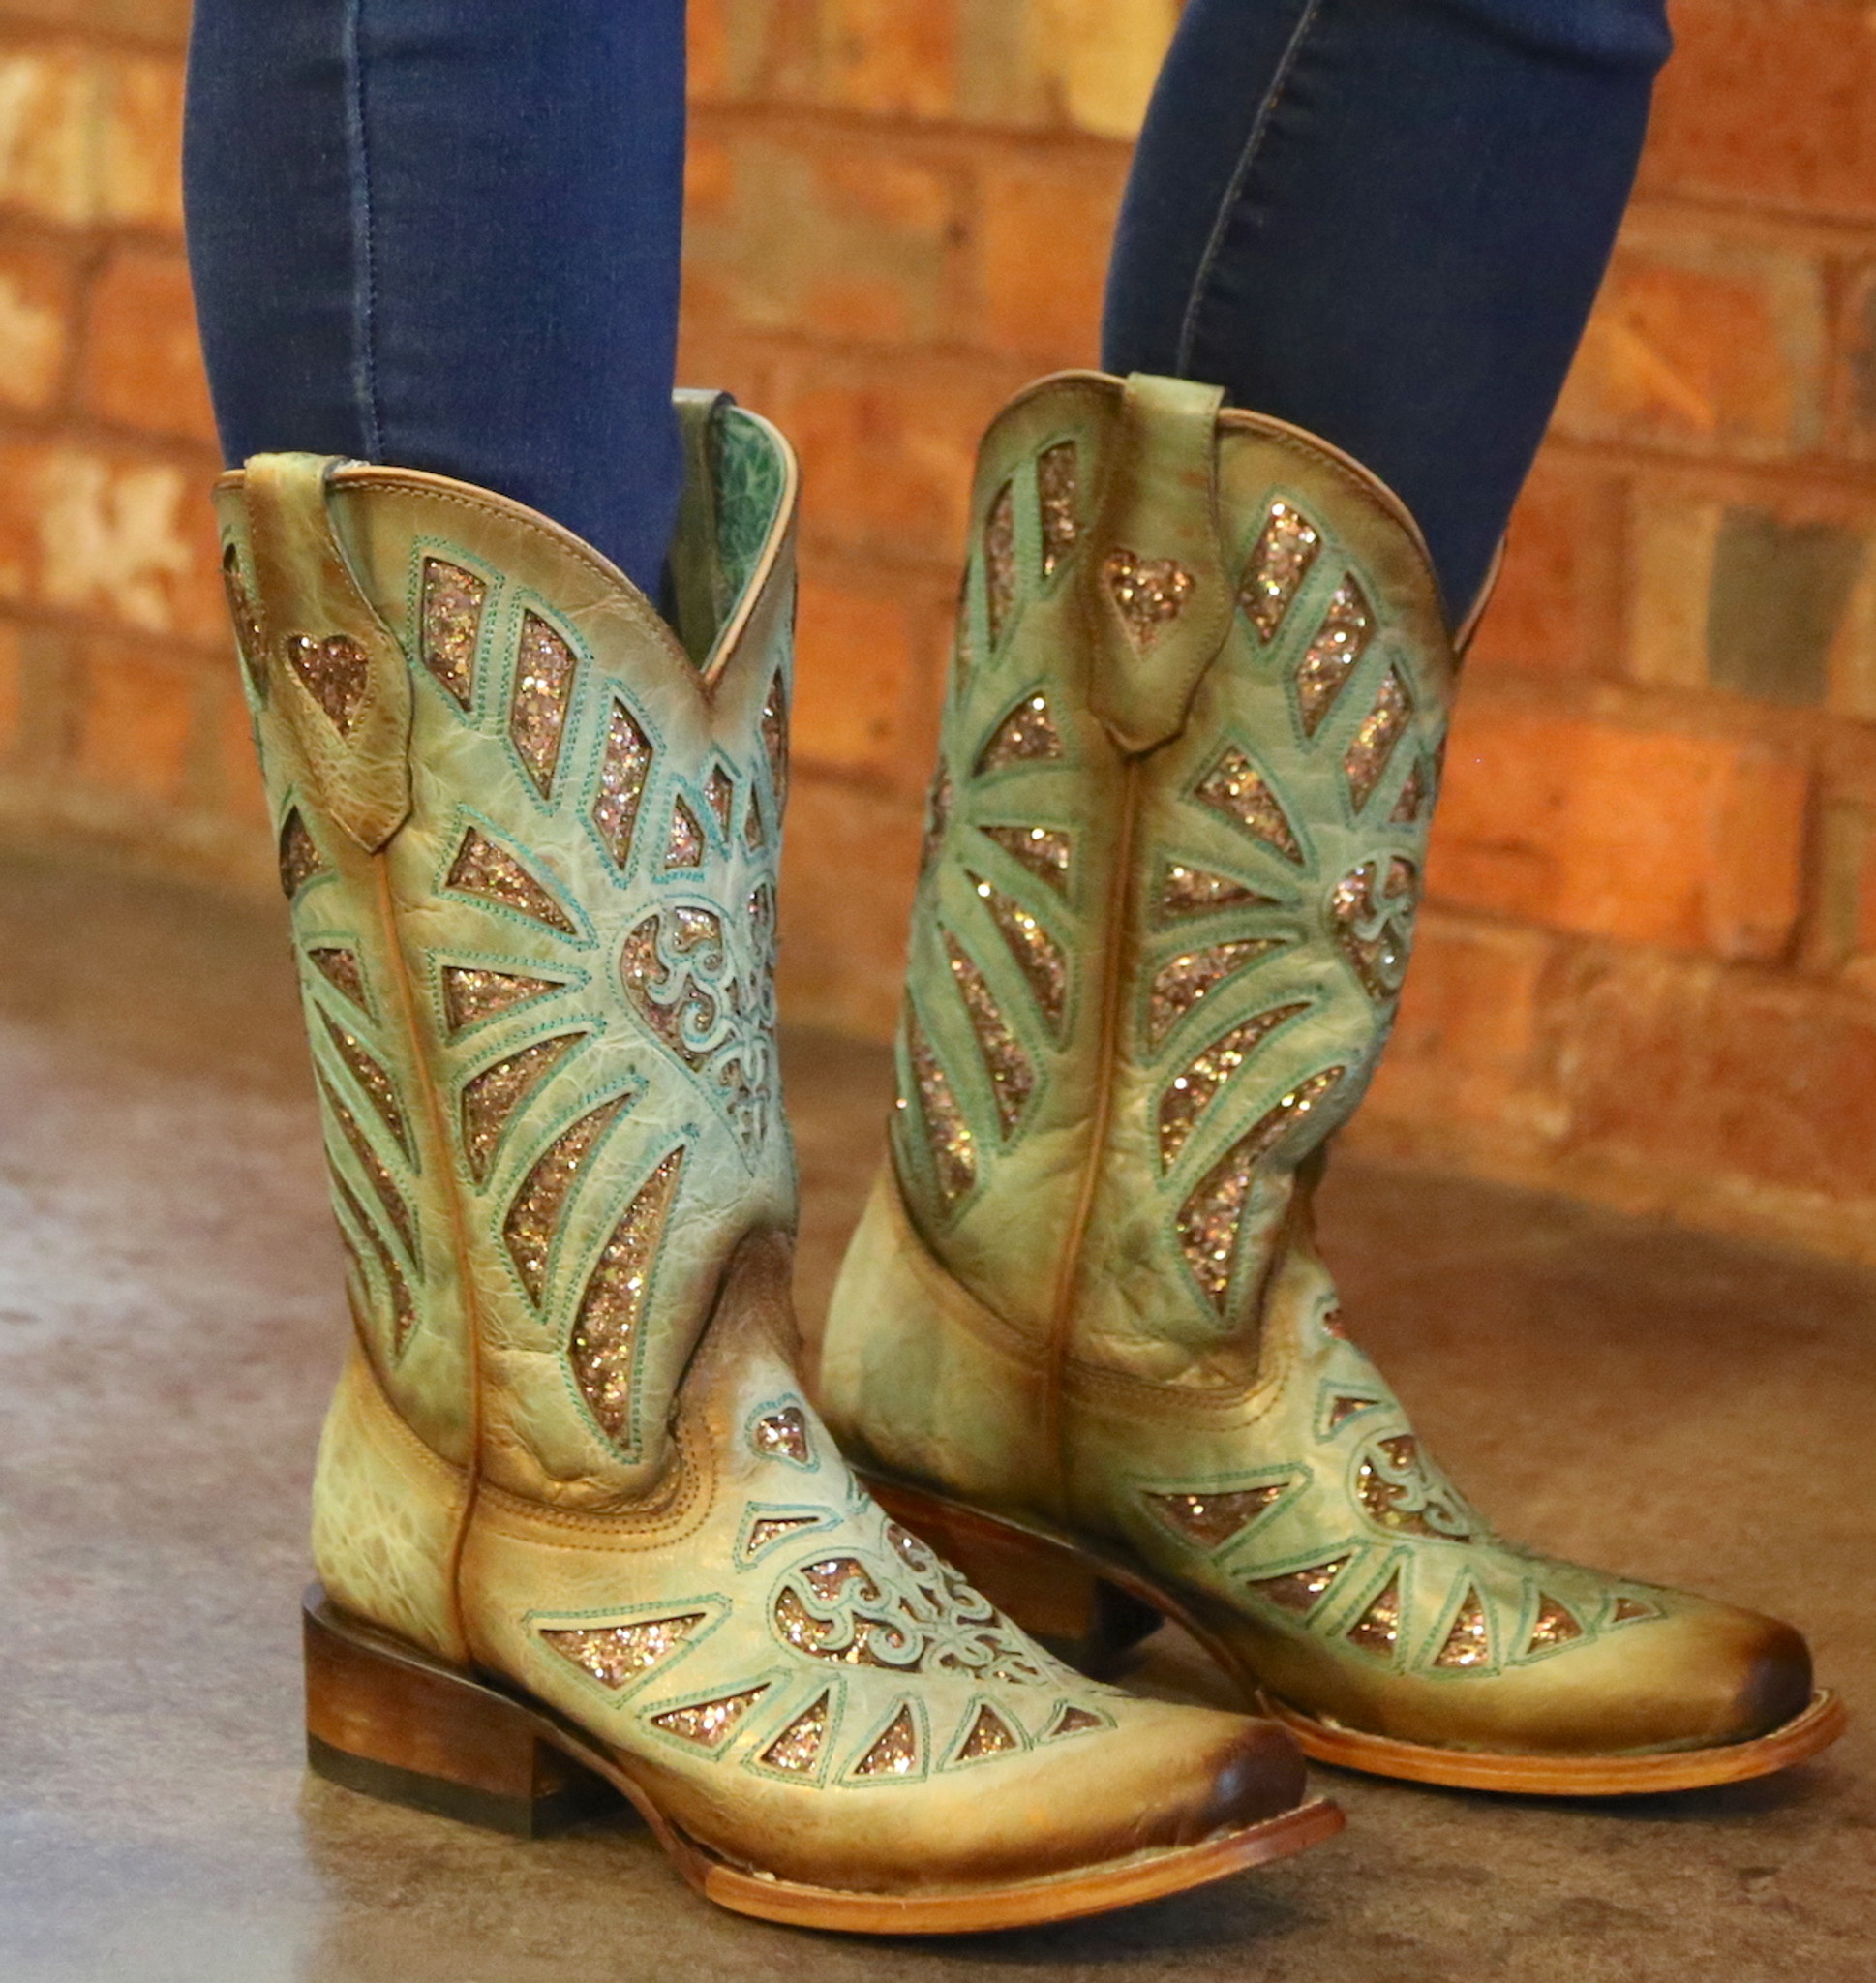 Corral Mint Glittered Inlay and Studs Square Toe C3262 Boots